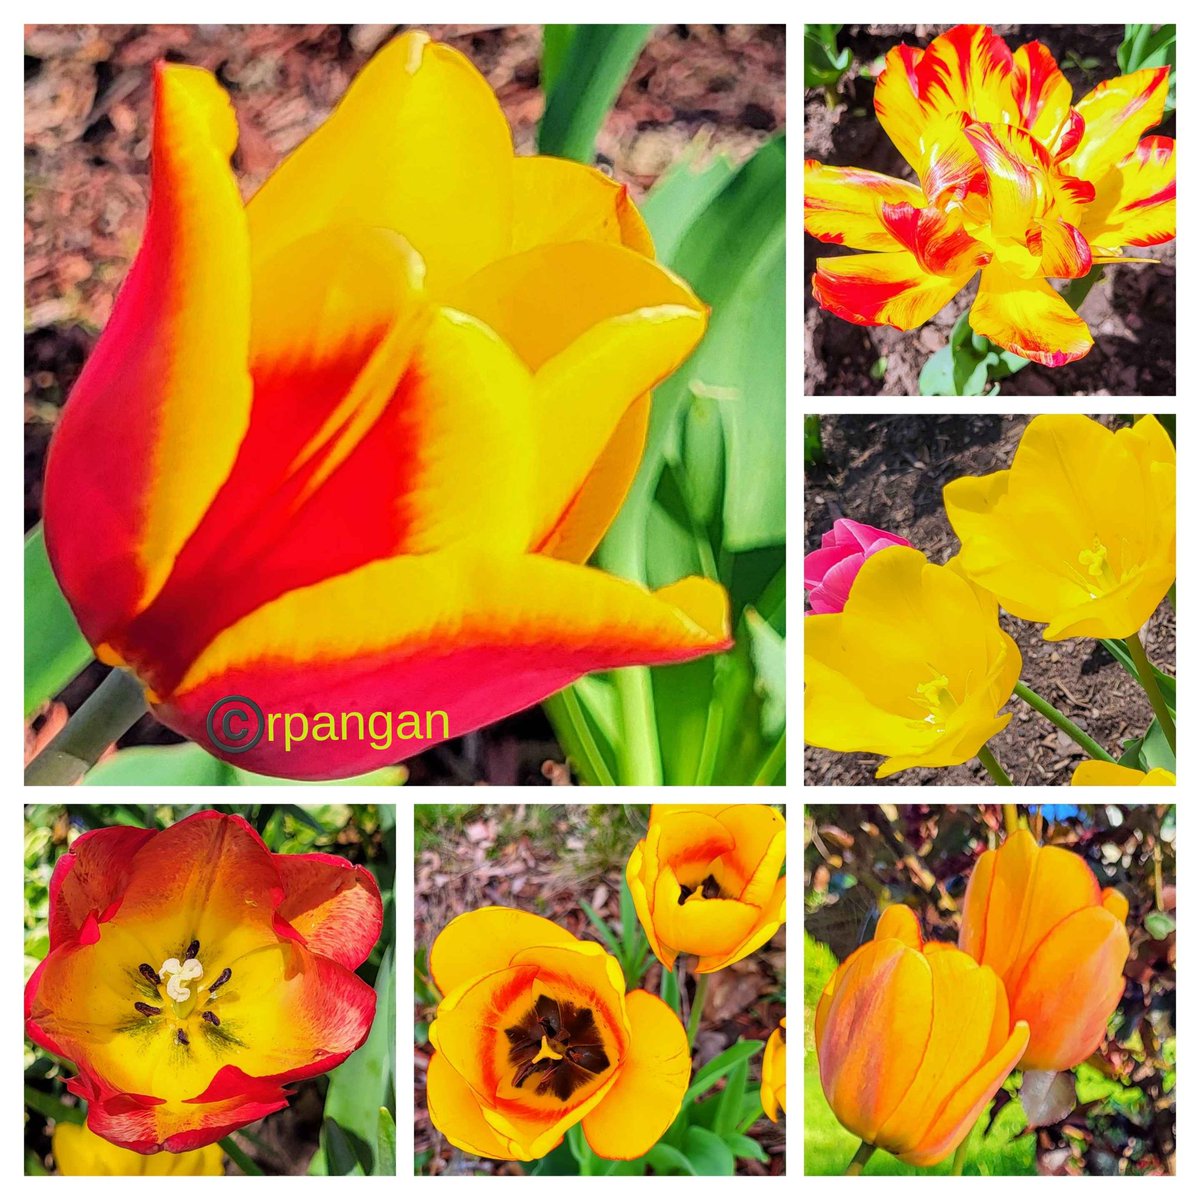 Last few tulips in the garden from couple weeks ago, as the season comes to a close.  Have a wonderful day.💛🧡🌞❤️
#TulipTuesday #mygarden #GardeningTwitter #FlowersOfTwitter #springflowers #springbulbs #gardens